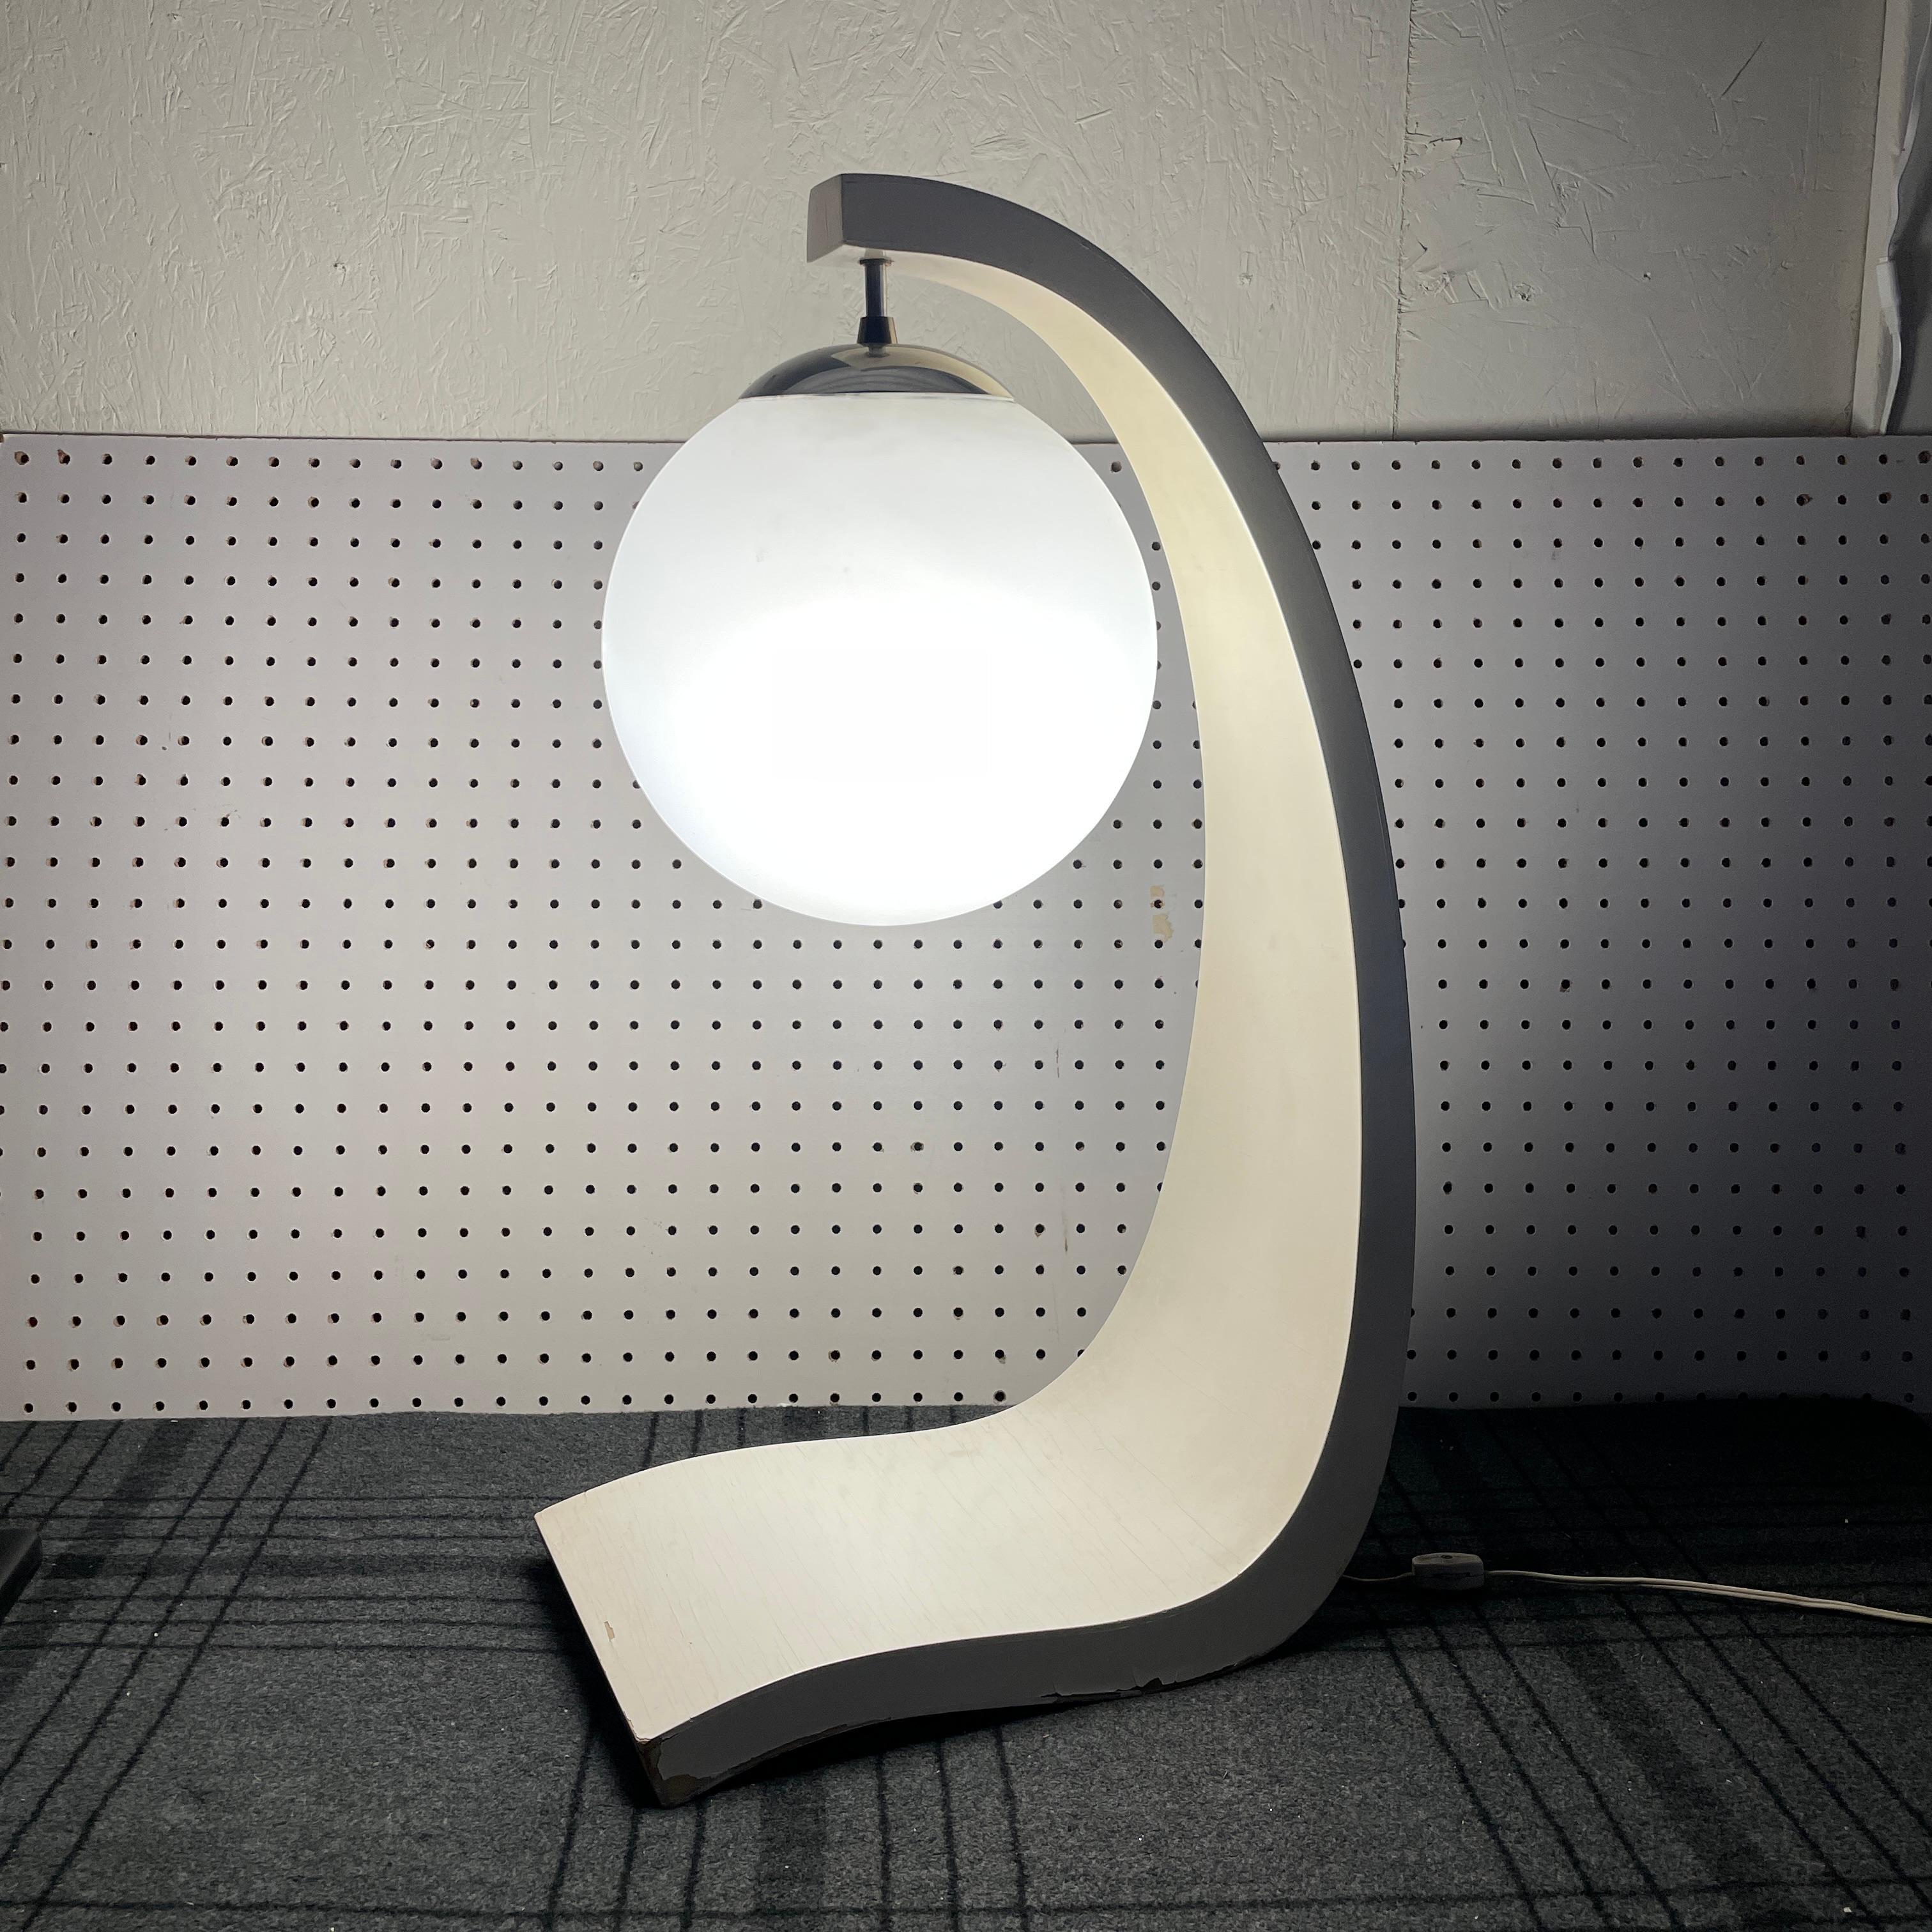 A rare mid-century modern table lamp designed by architect Jack Haywood for Modeline of California. Features a curving wooden frame and a frosted glass shade. Lamp works perfectly and looks incredible lit up. It has a felt pad on the bottom to keep